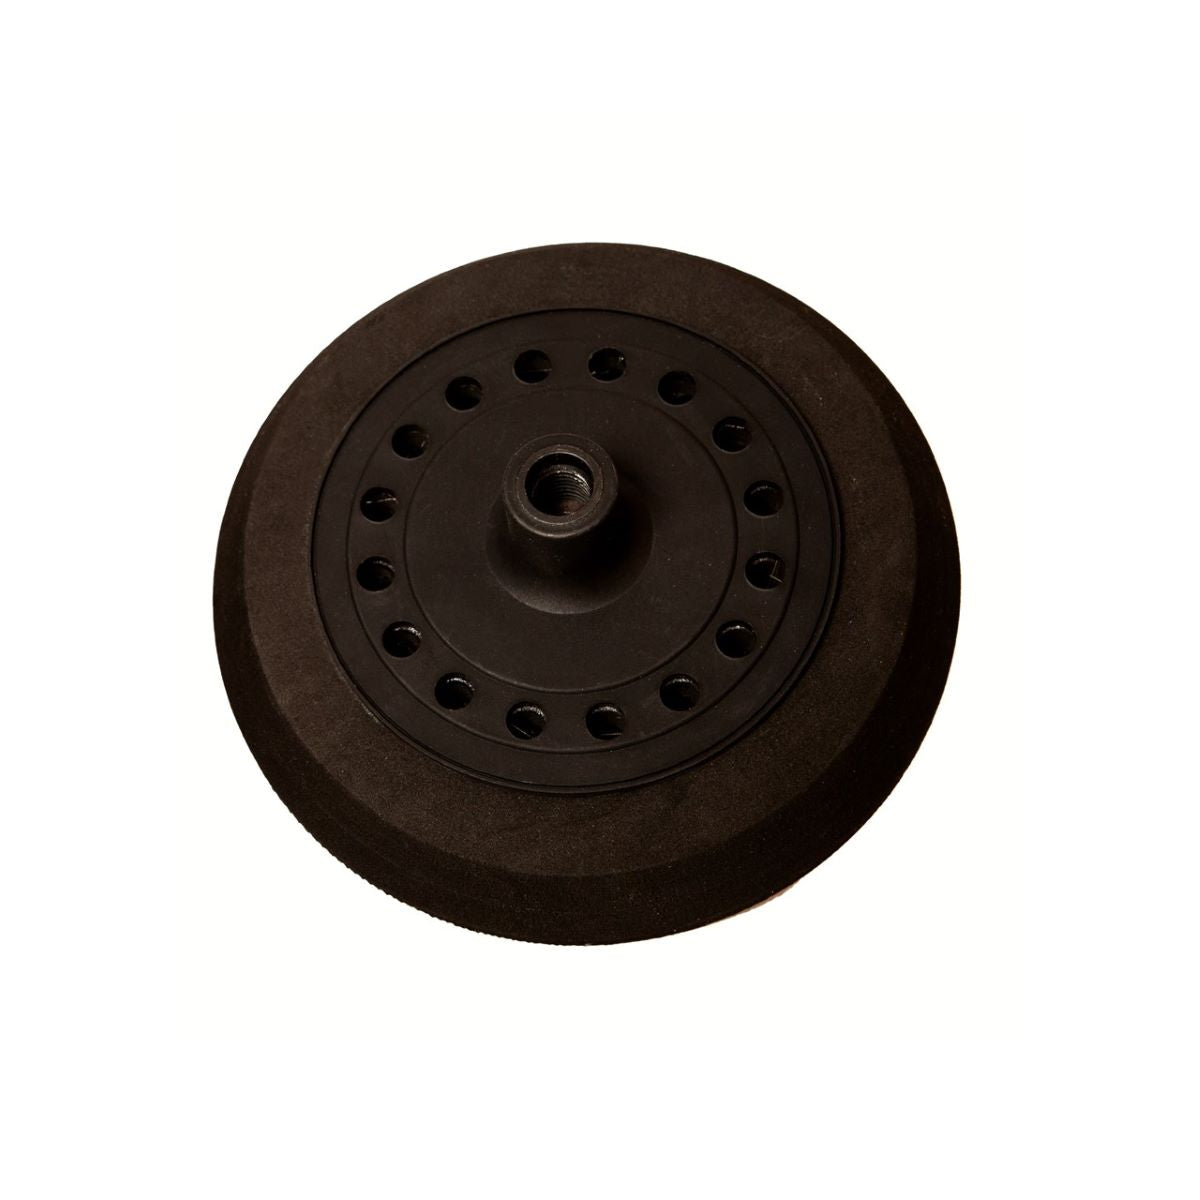 8" 16H (Outer Edge Holes) Black Hook Rotary Pad w/ Groove & Center Screw - For Rotary Sander Hook Discs